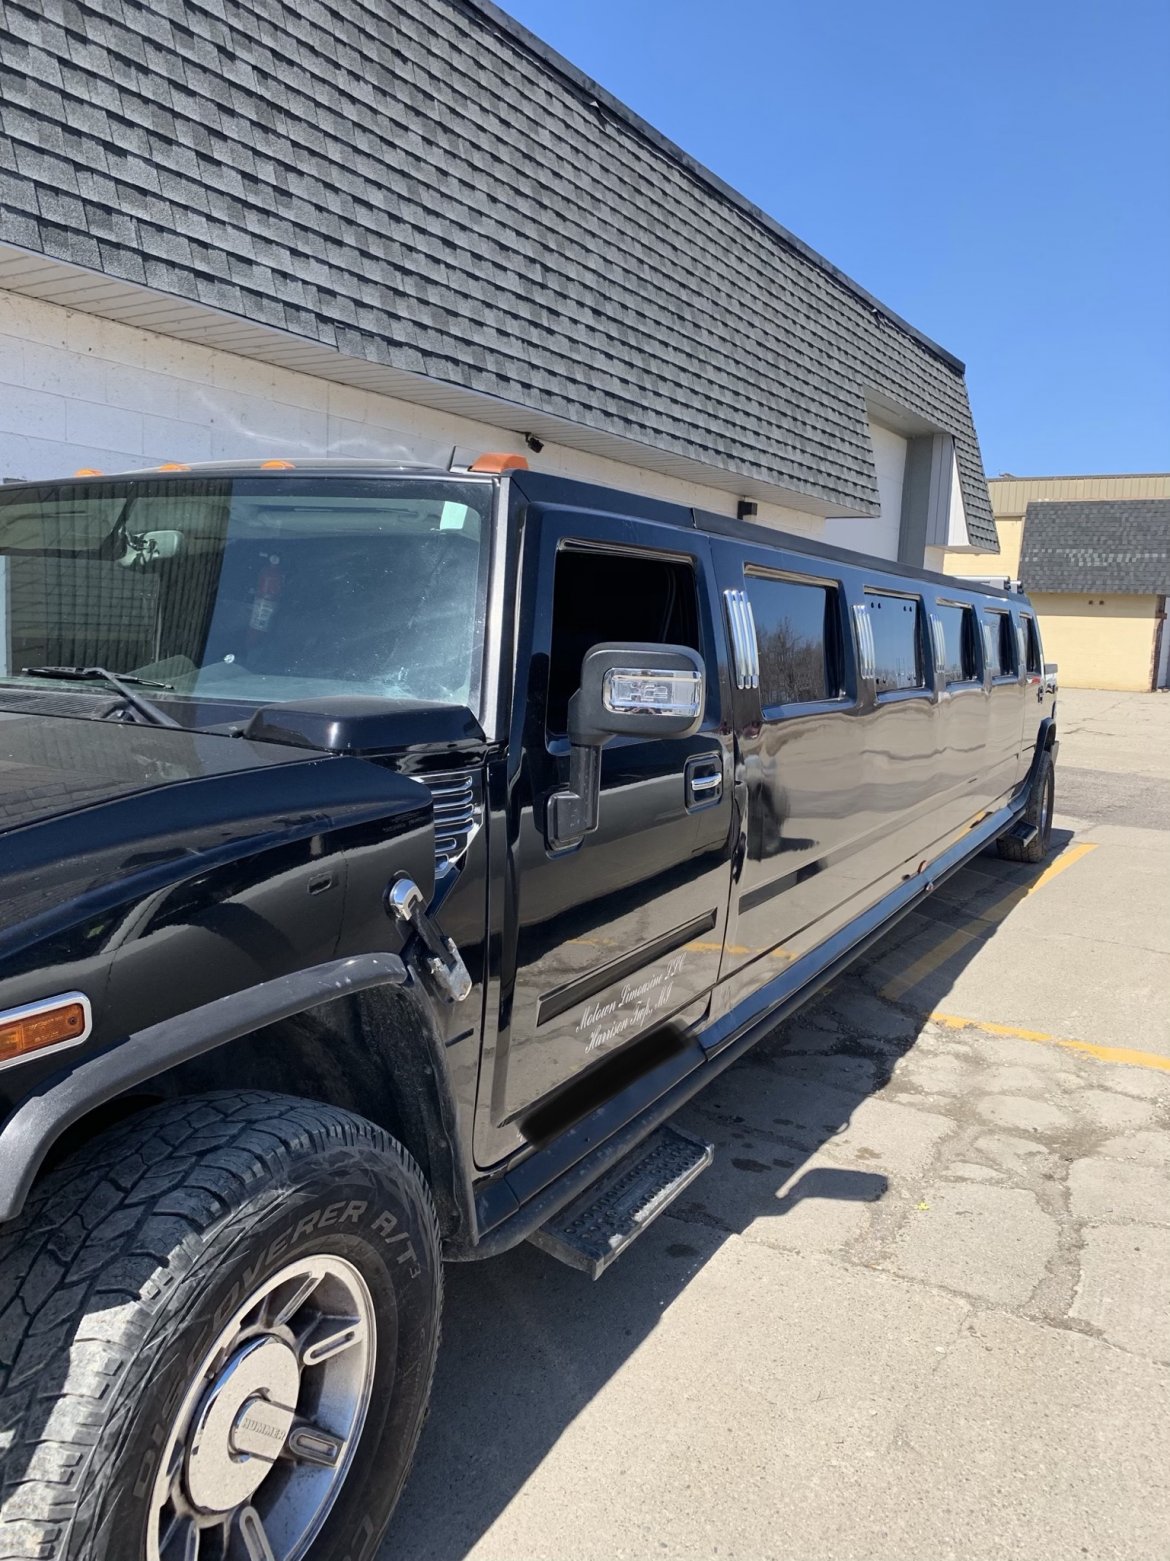 SUV Stretch for sale: 2005 Hummer H2 200&quot;